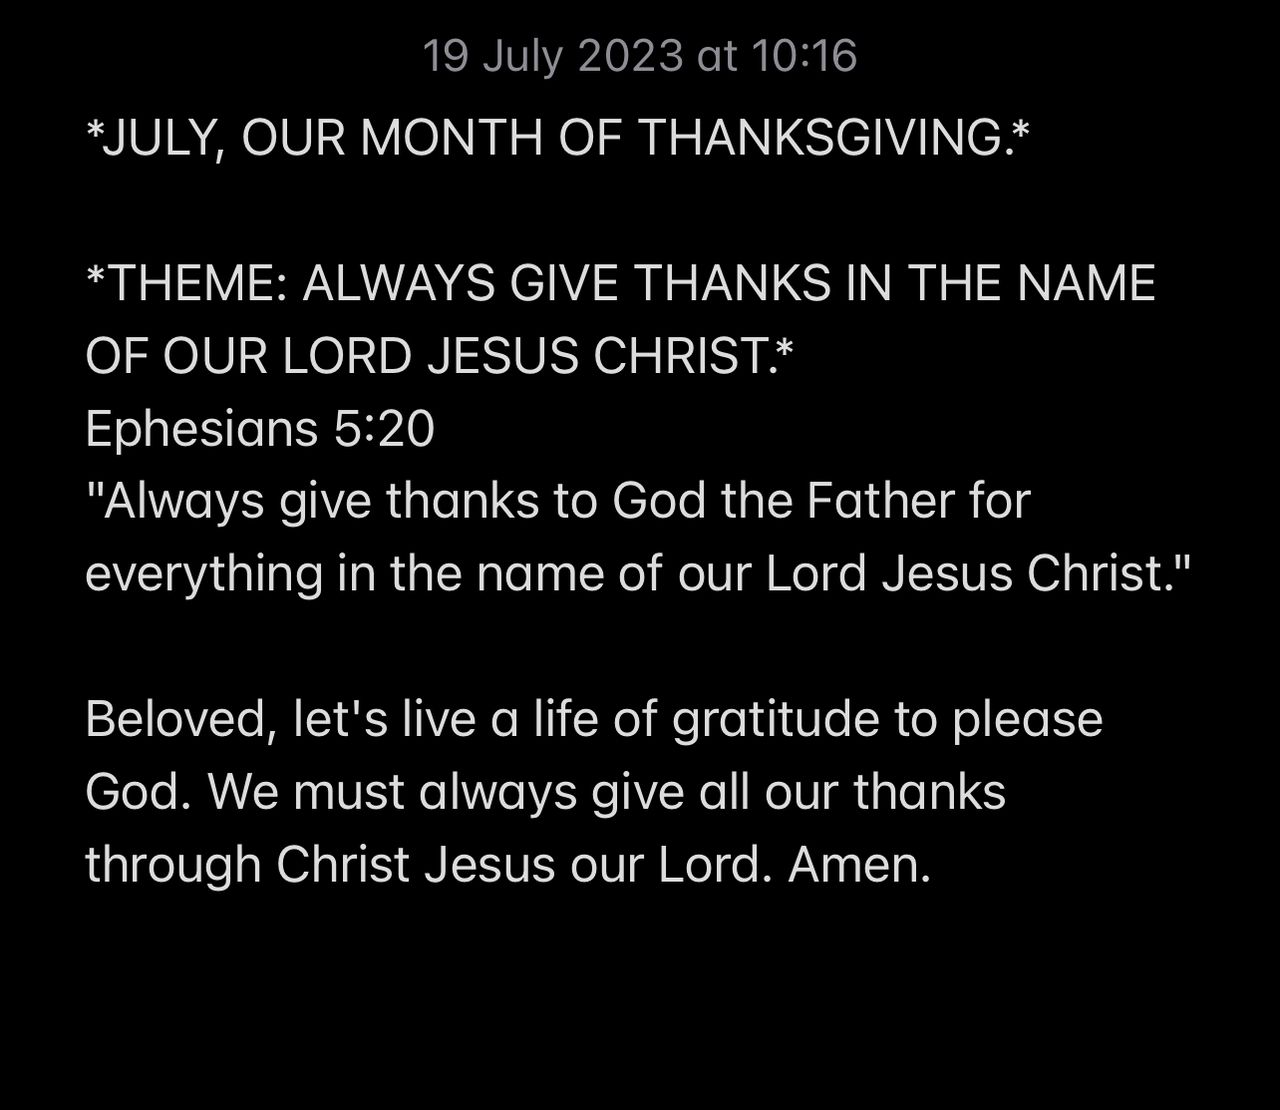 ALWAYS GIVE THANKS IN THE NAME OF OUR LORD JESUS CHRIST.